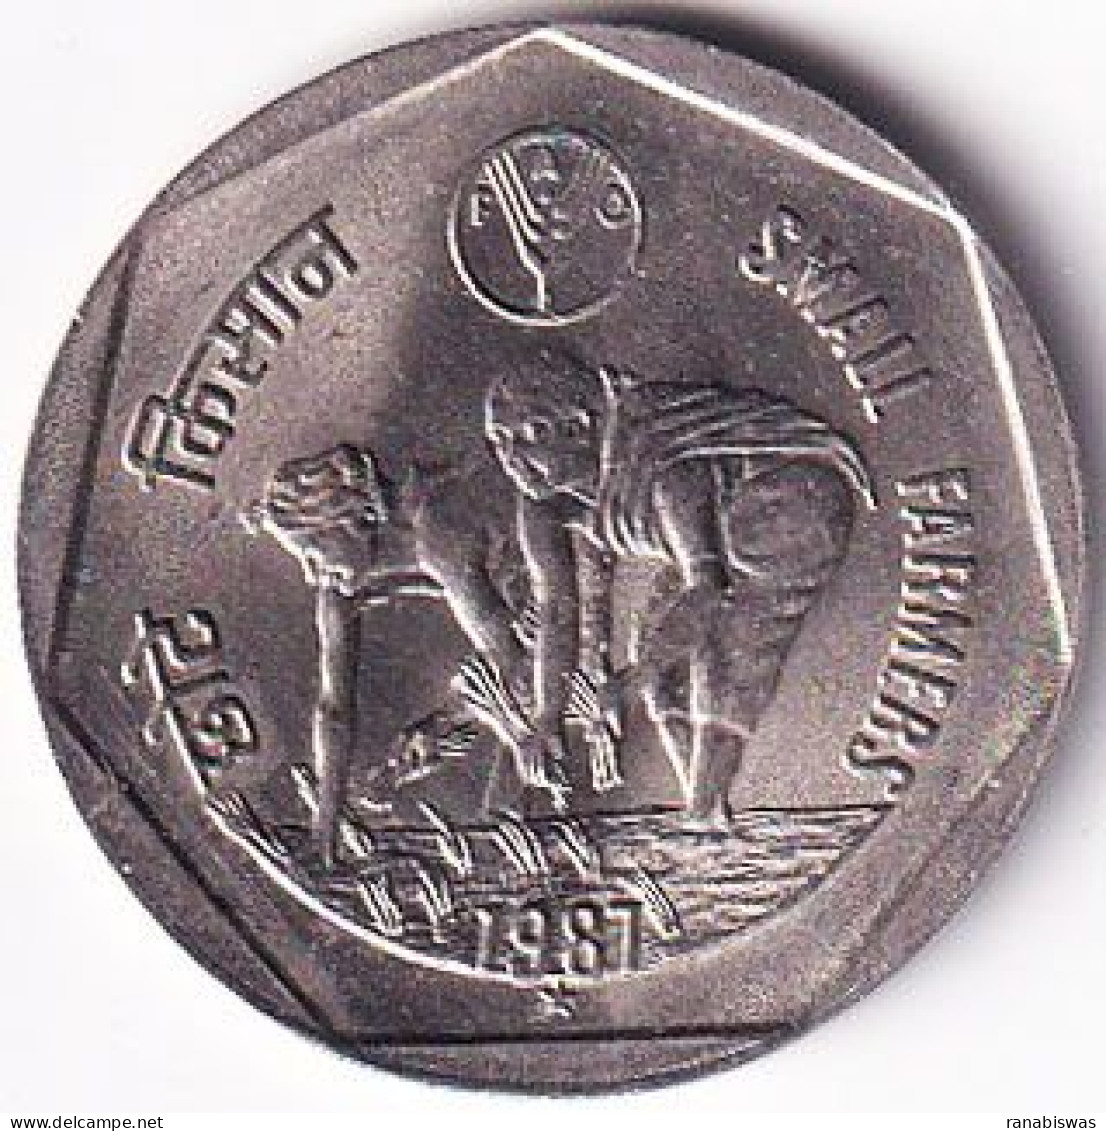 INDIA COIN LOT 32, 1 RUPEE 1987, SMALL FARMERS, FAO, HYDERABAD MINT, UNC, SCARE - Indien